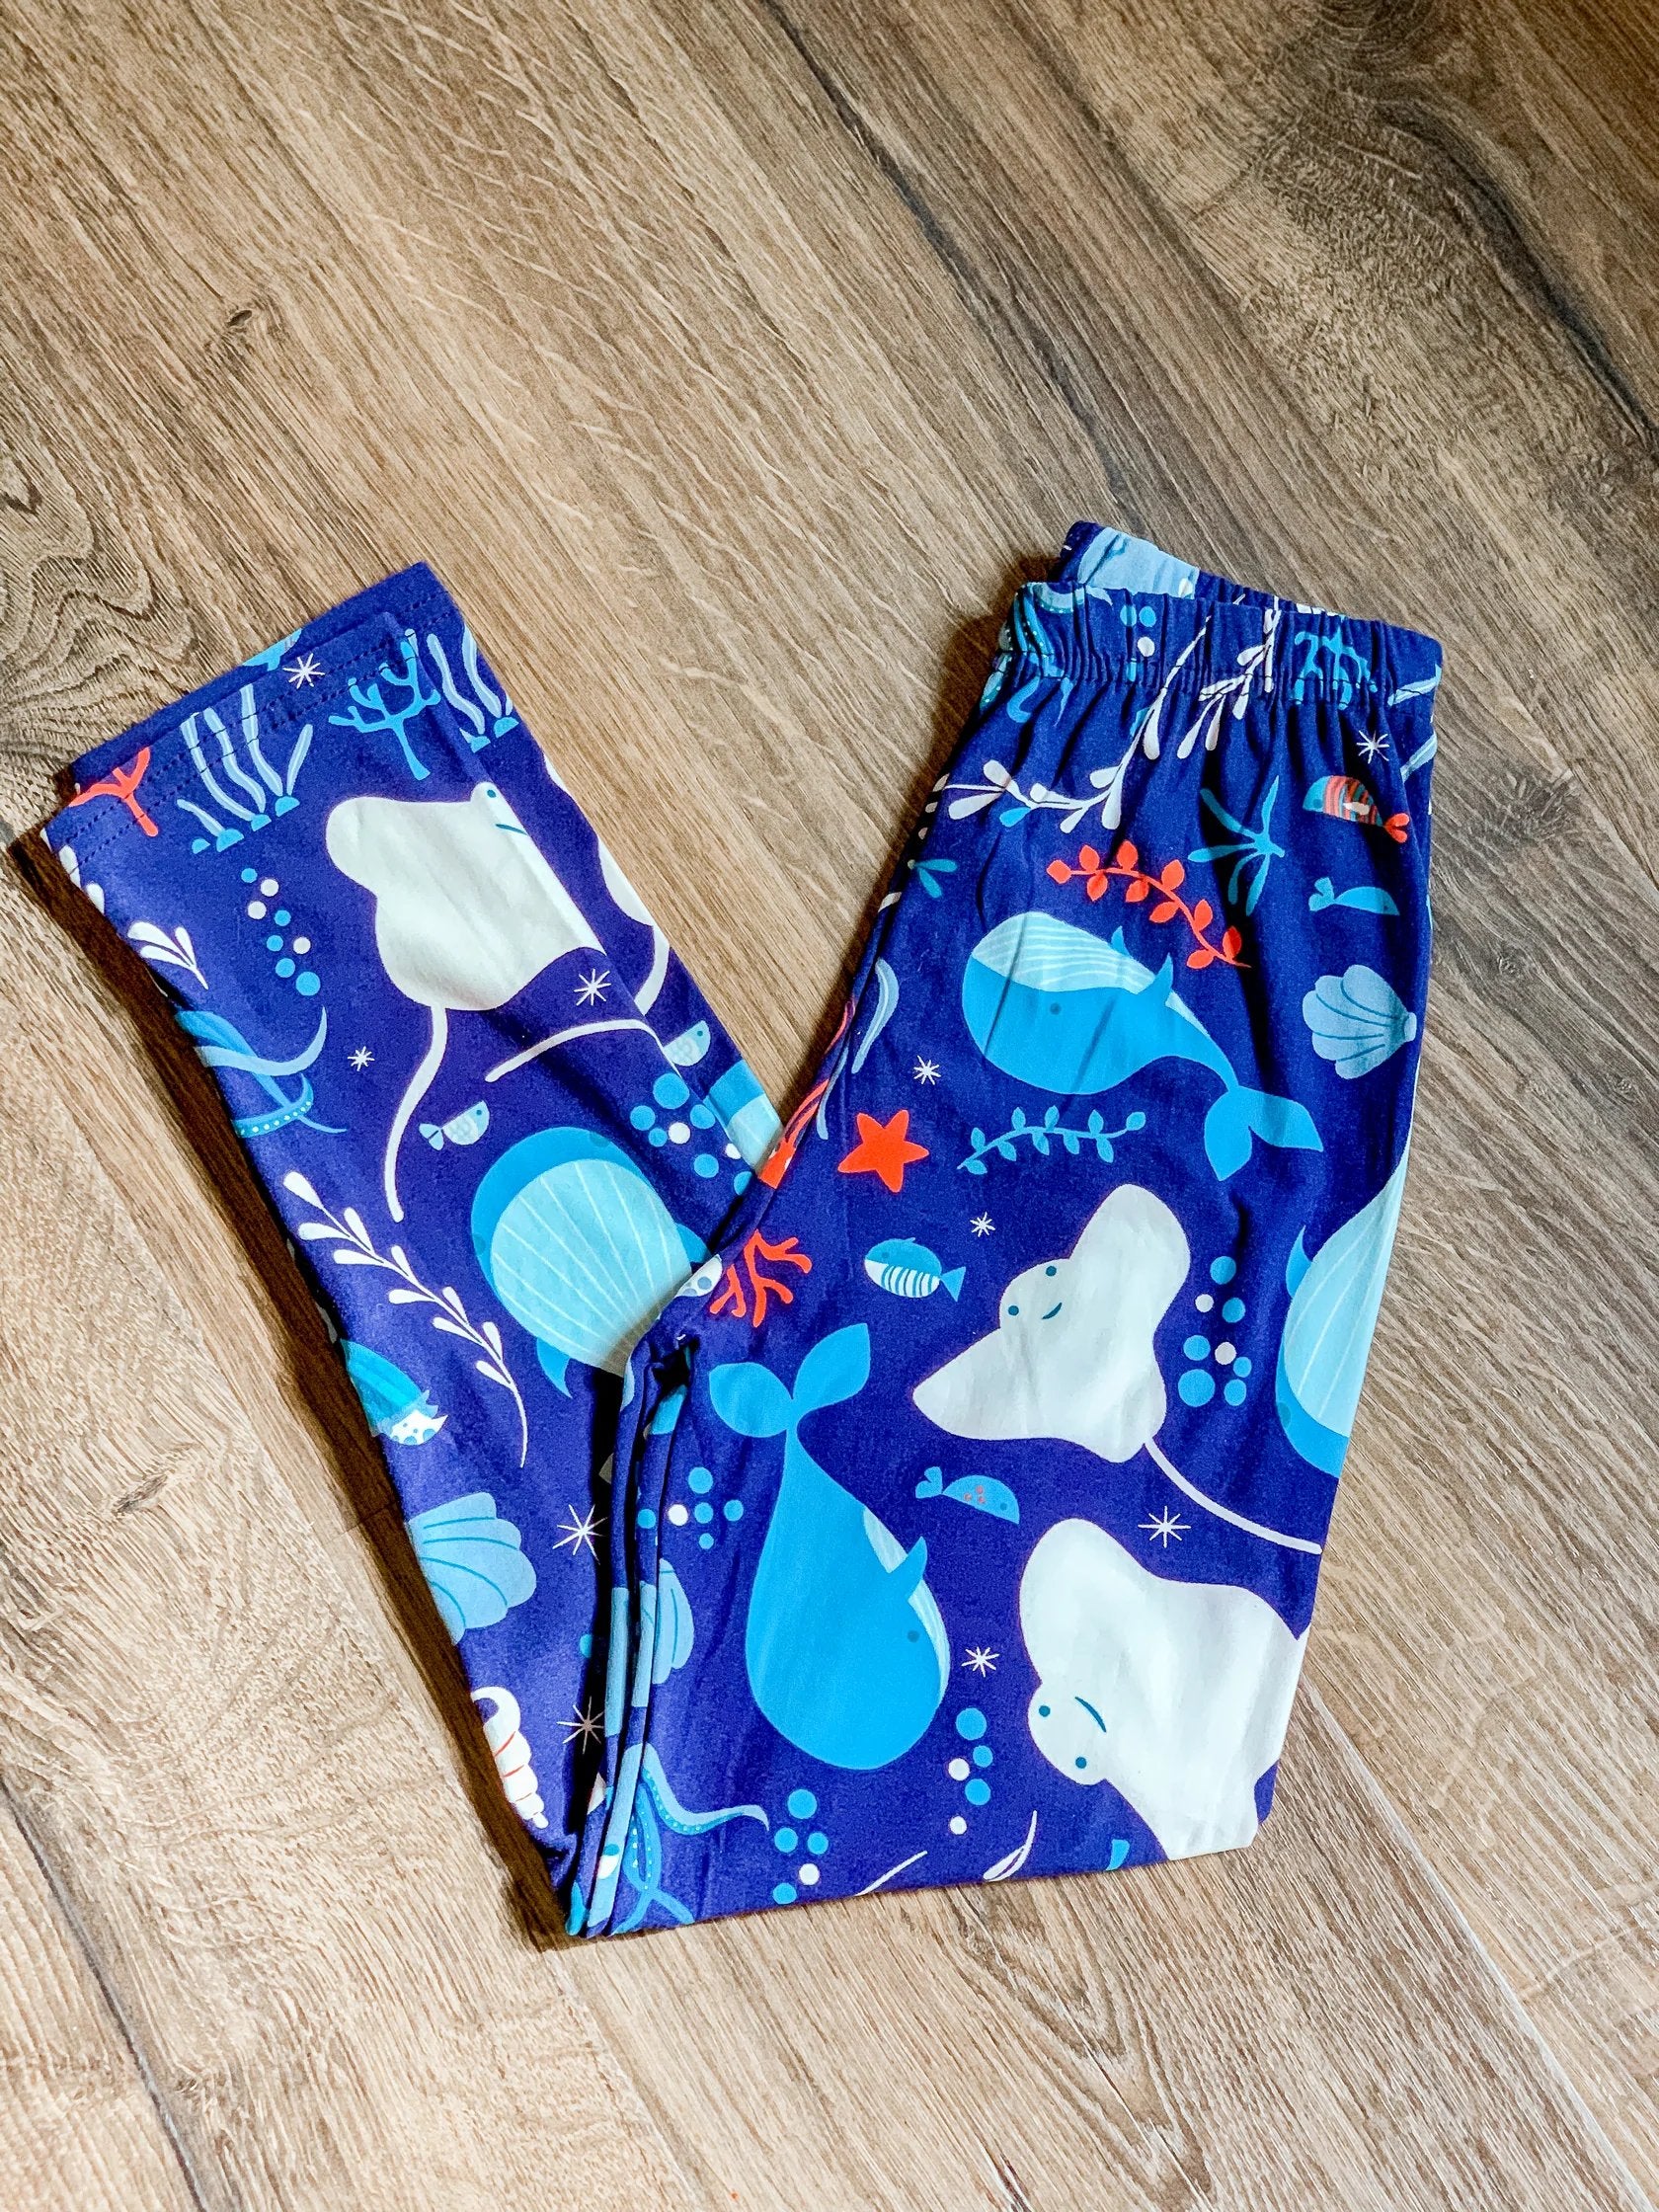 Indian Flower on X: Just in! Stylish leggings in super colours. Pick your  kid's favourite colour and let us know it in the comments. To order, visit  our website:  #indianflower #indianflowerleggings #